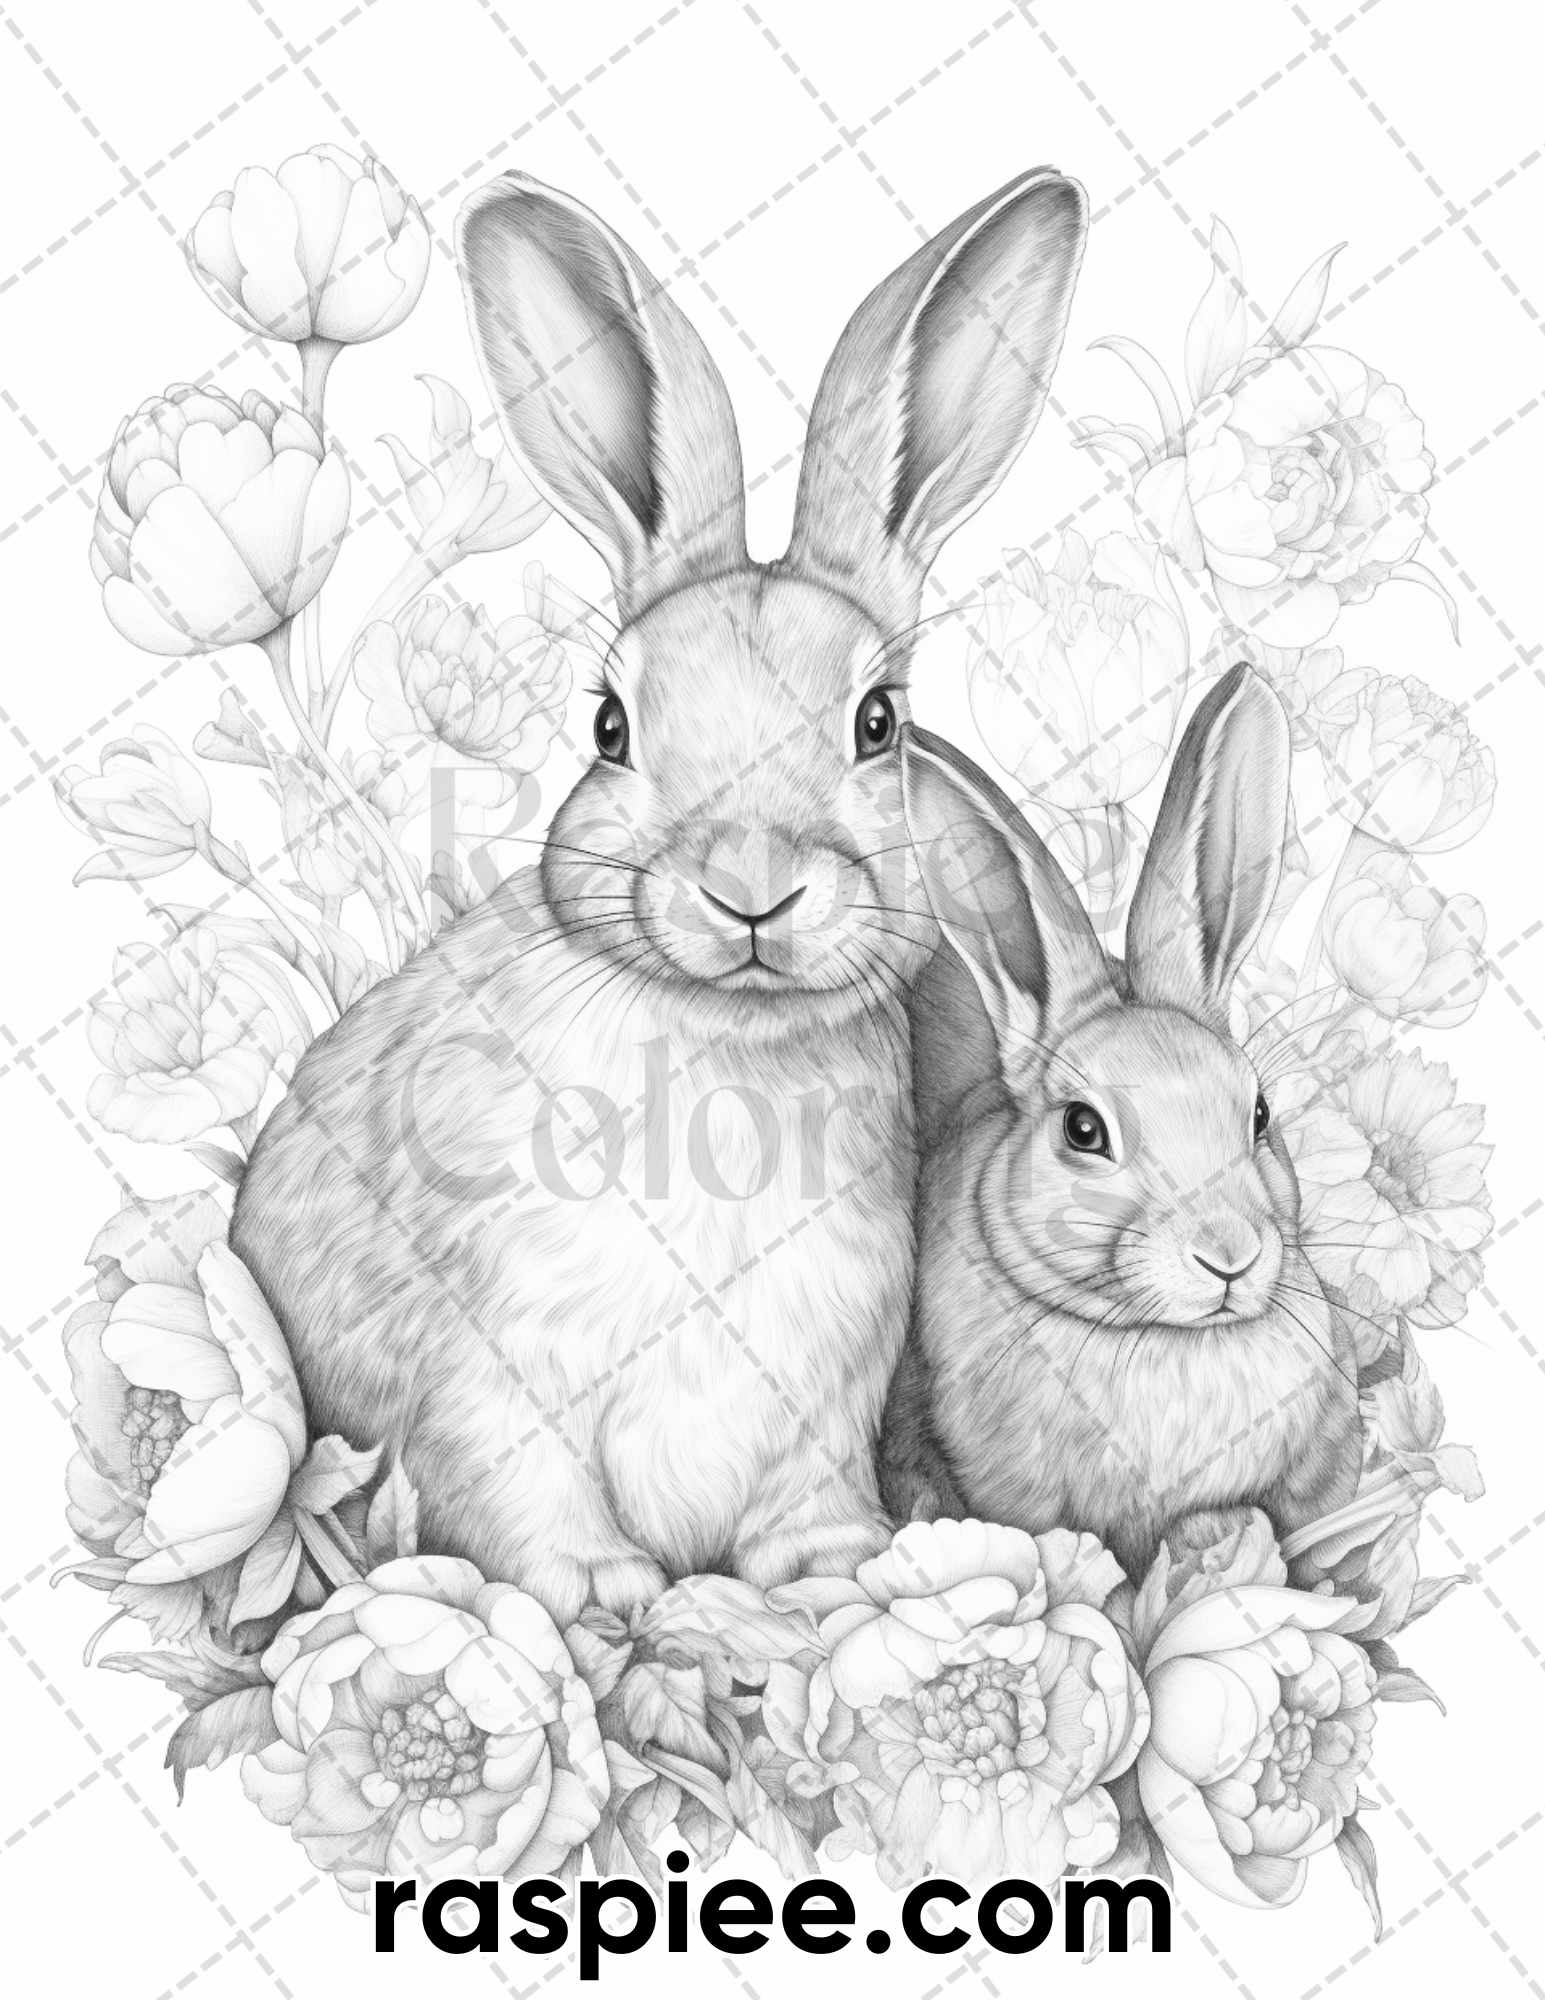 Animal Couple Coloring Page, Stress Relief Coloring Sheet, Romantic Animal Coloring Pages, High-Quality Coloring Printable, Animal Coloring Book Printable, Animal Coloring Pages for Adults